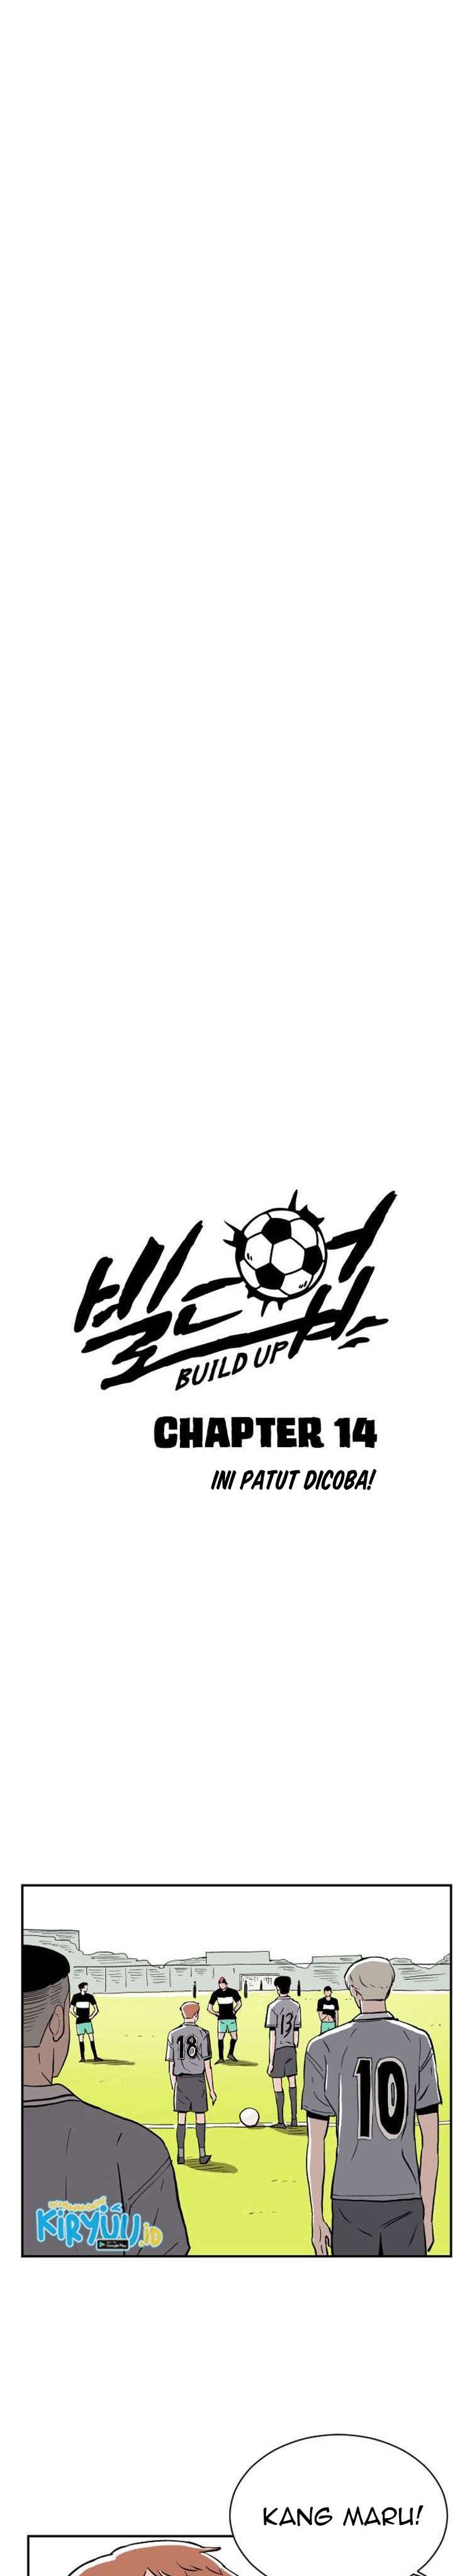 Build Up Chapter 14